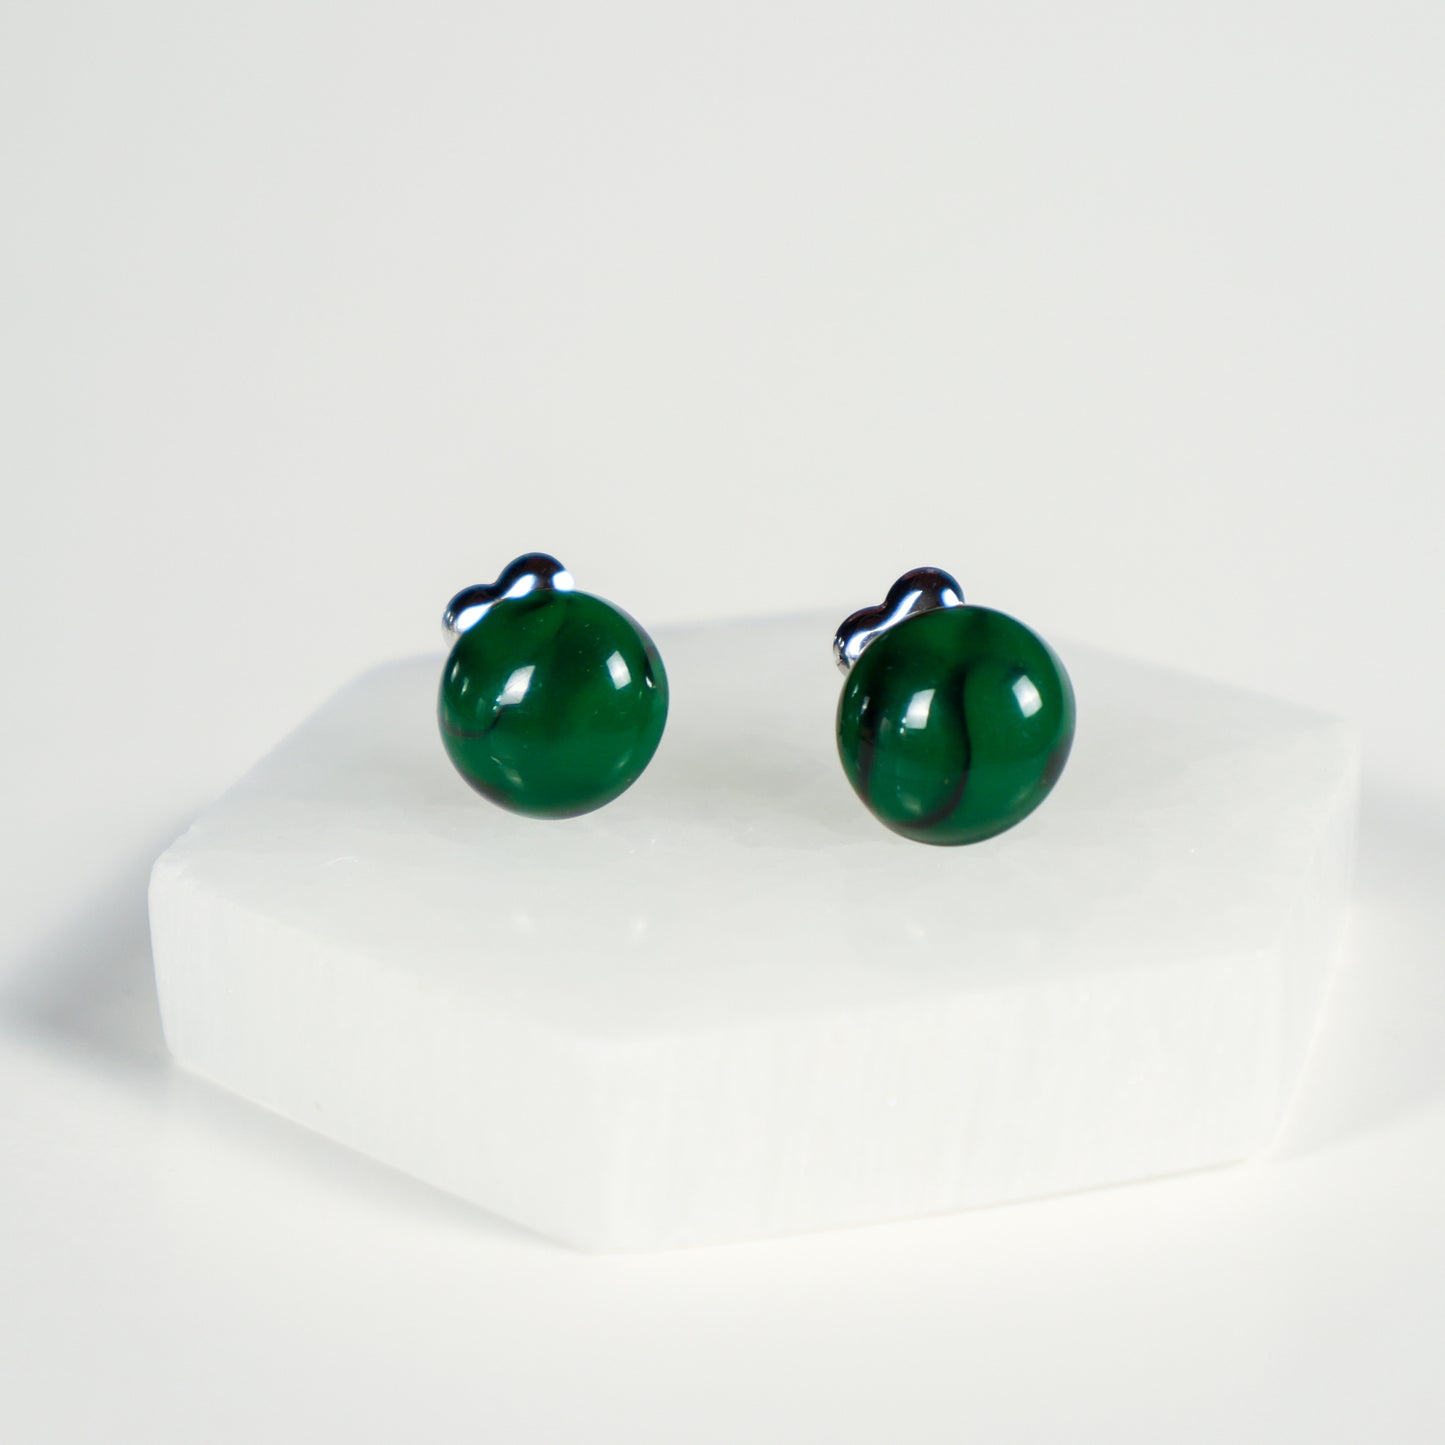 Mini Button Earrings - Forest Green with Black